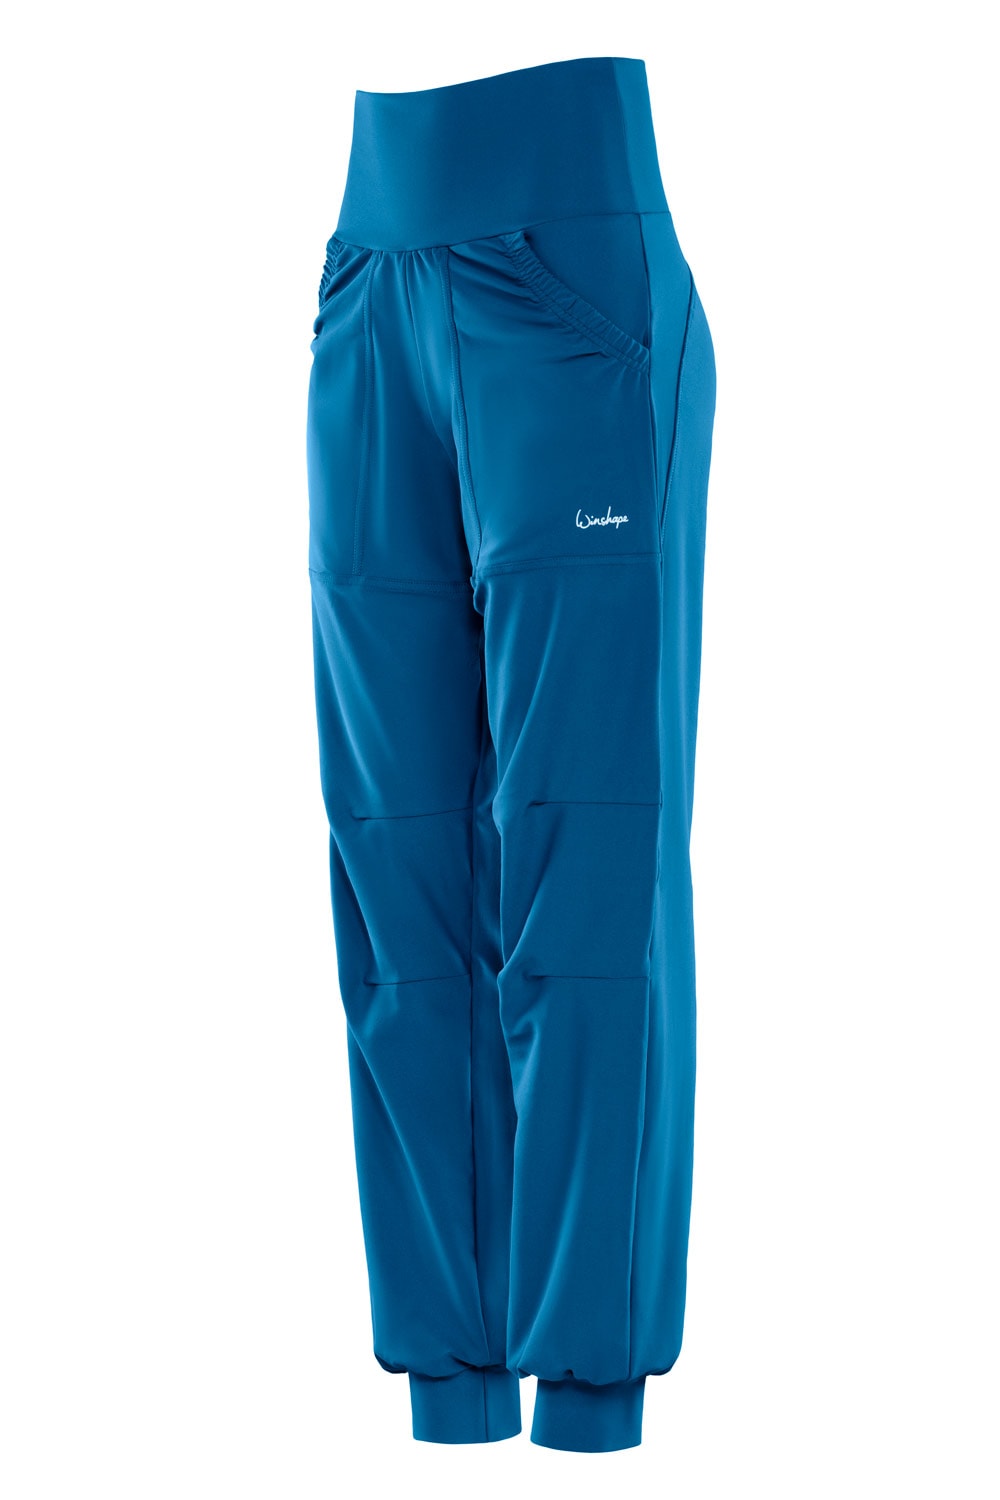 Time Leisure online »Functional Sporthose Comfort LEI101C«, OTTO Waist bei Winshape Trousers High